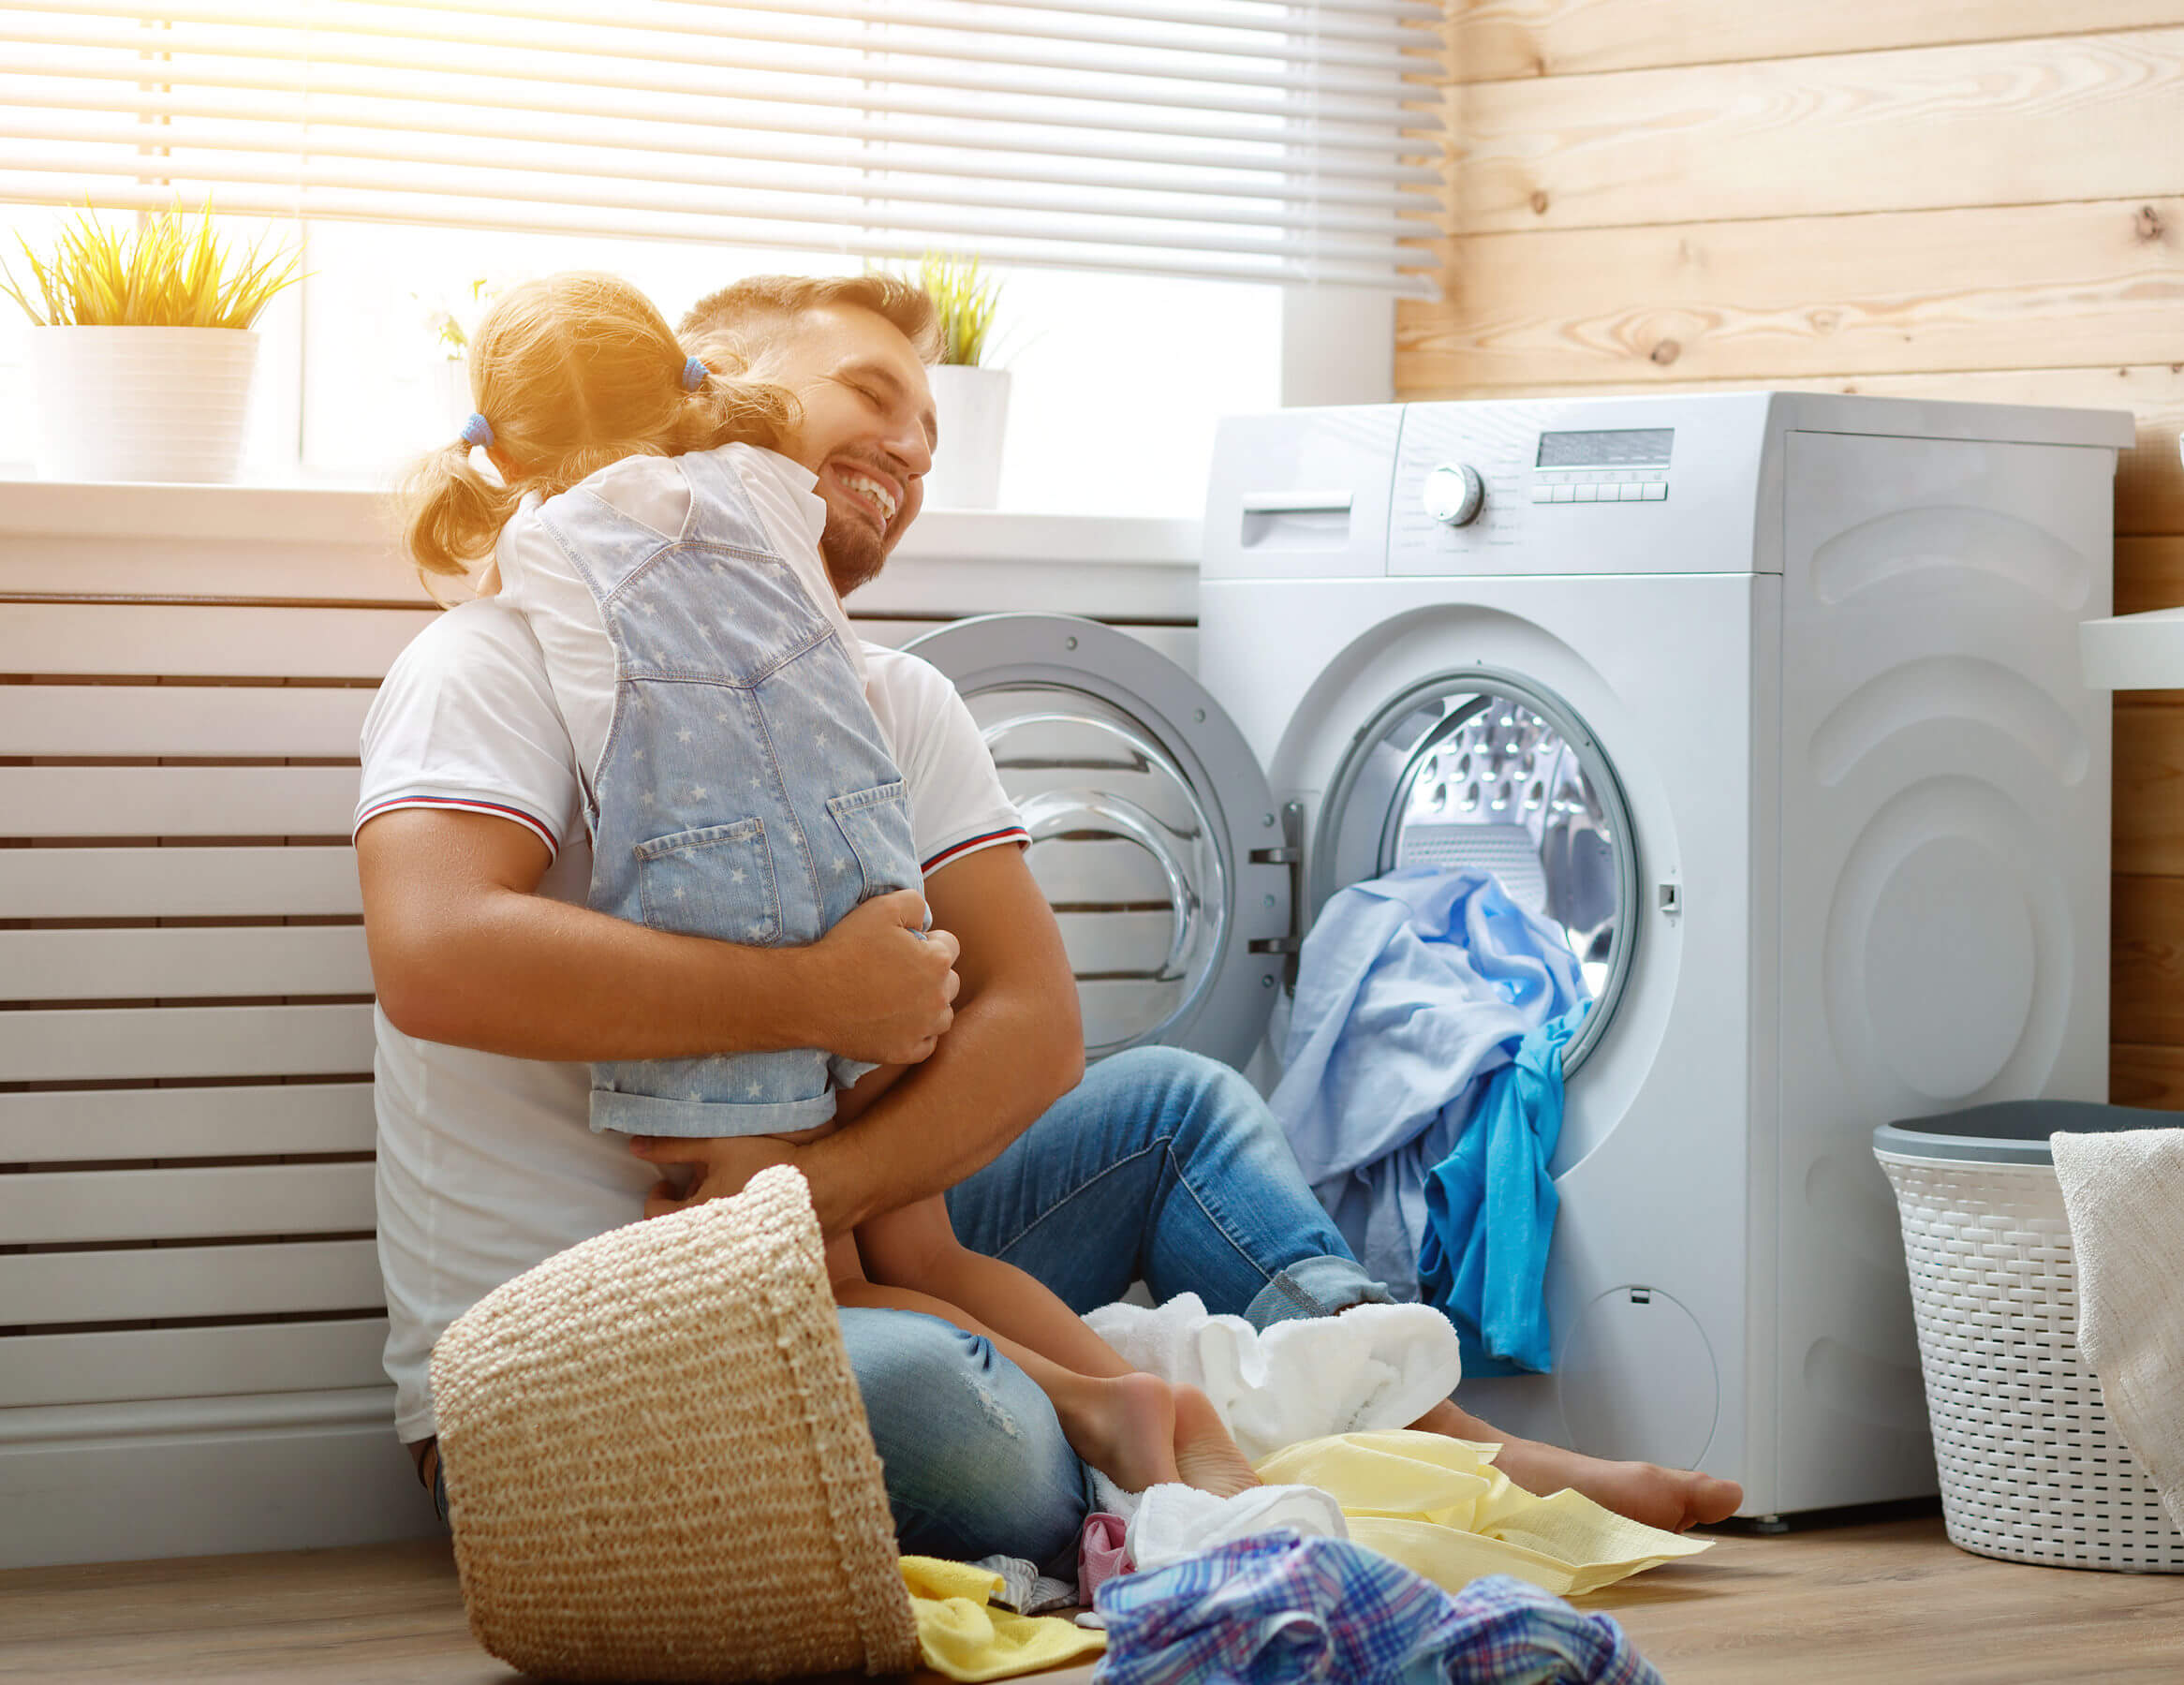 A father and daughter hugging as they do laundry together.